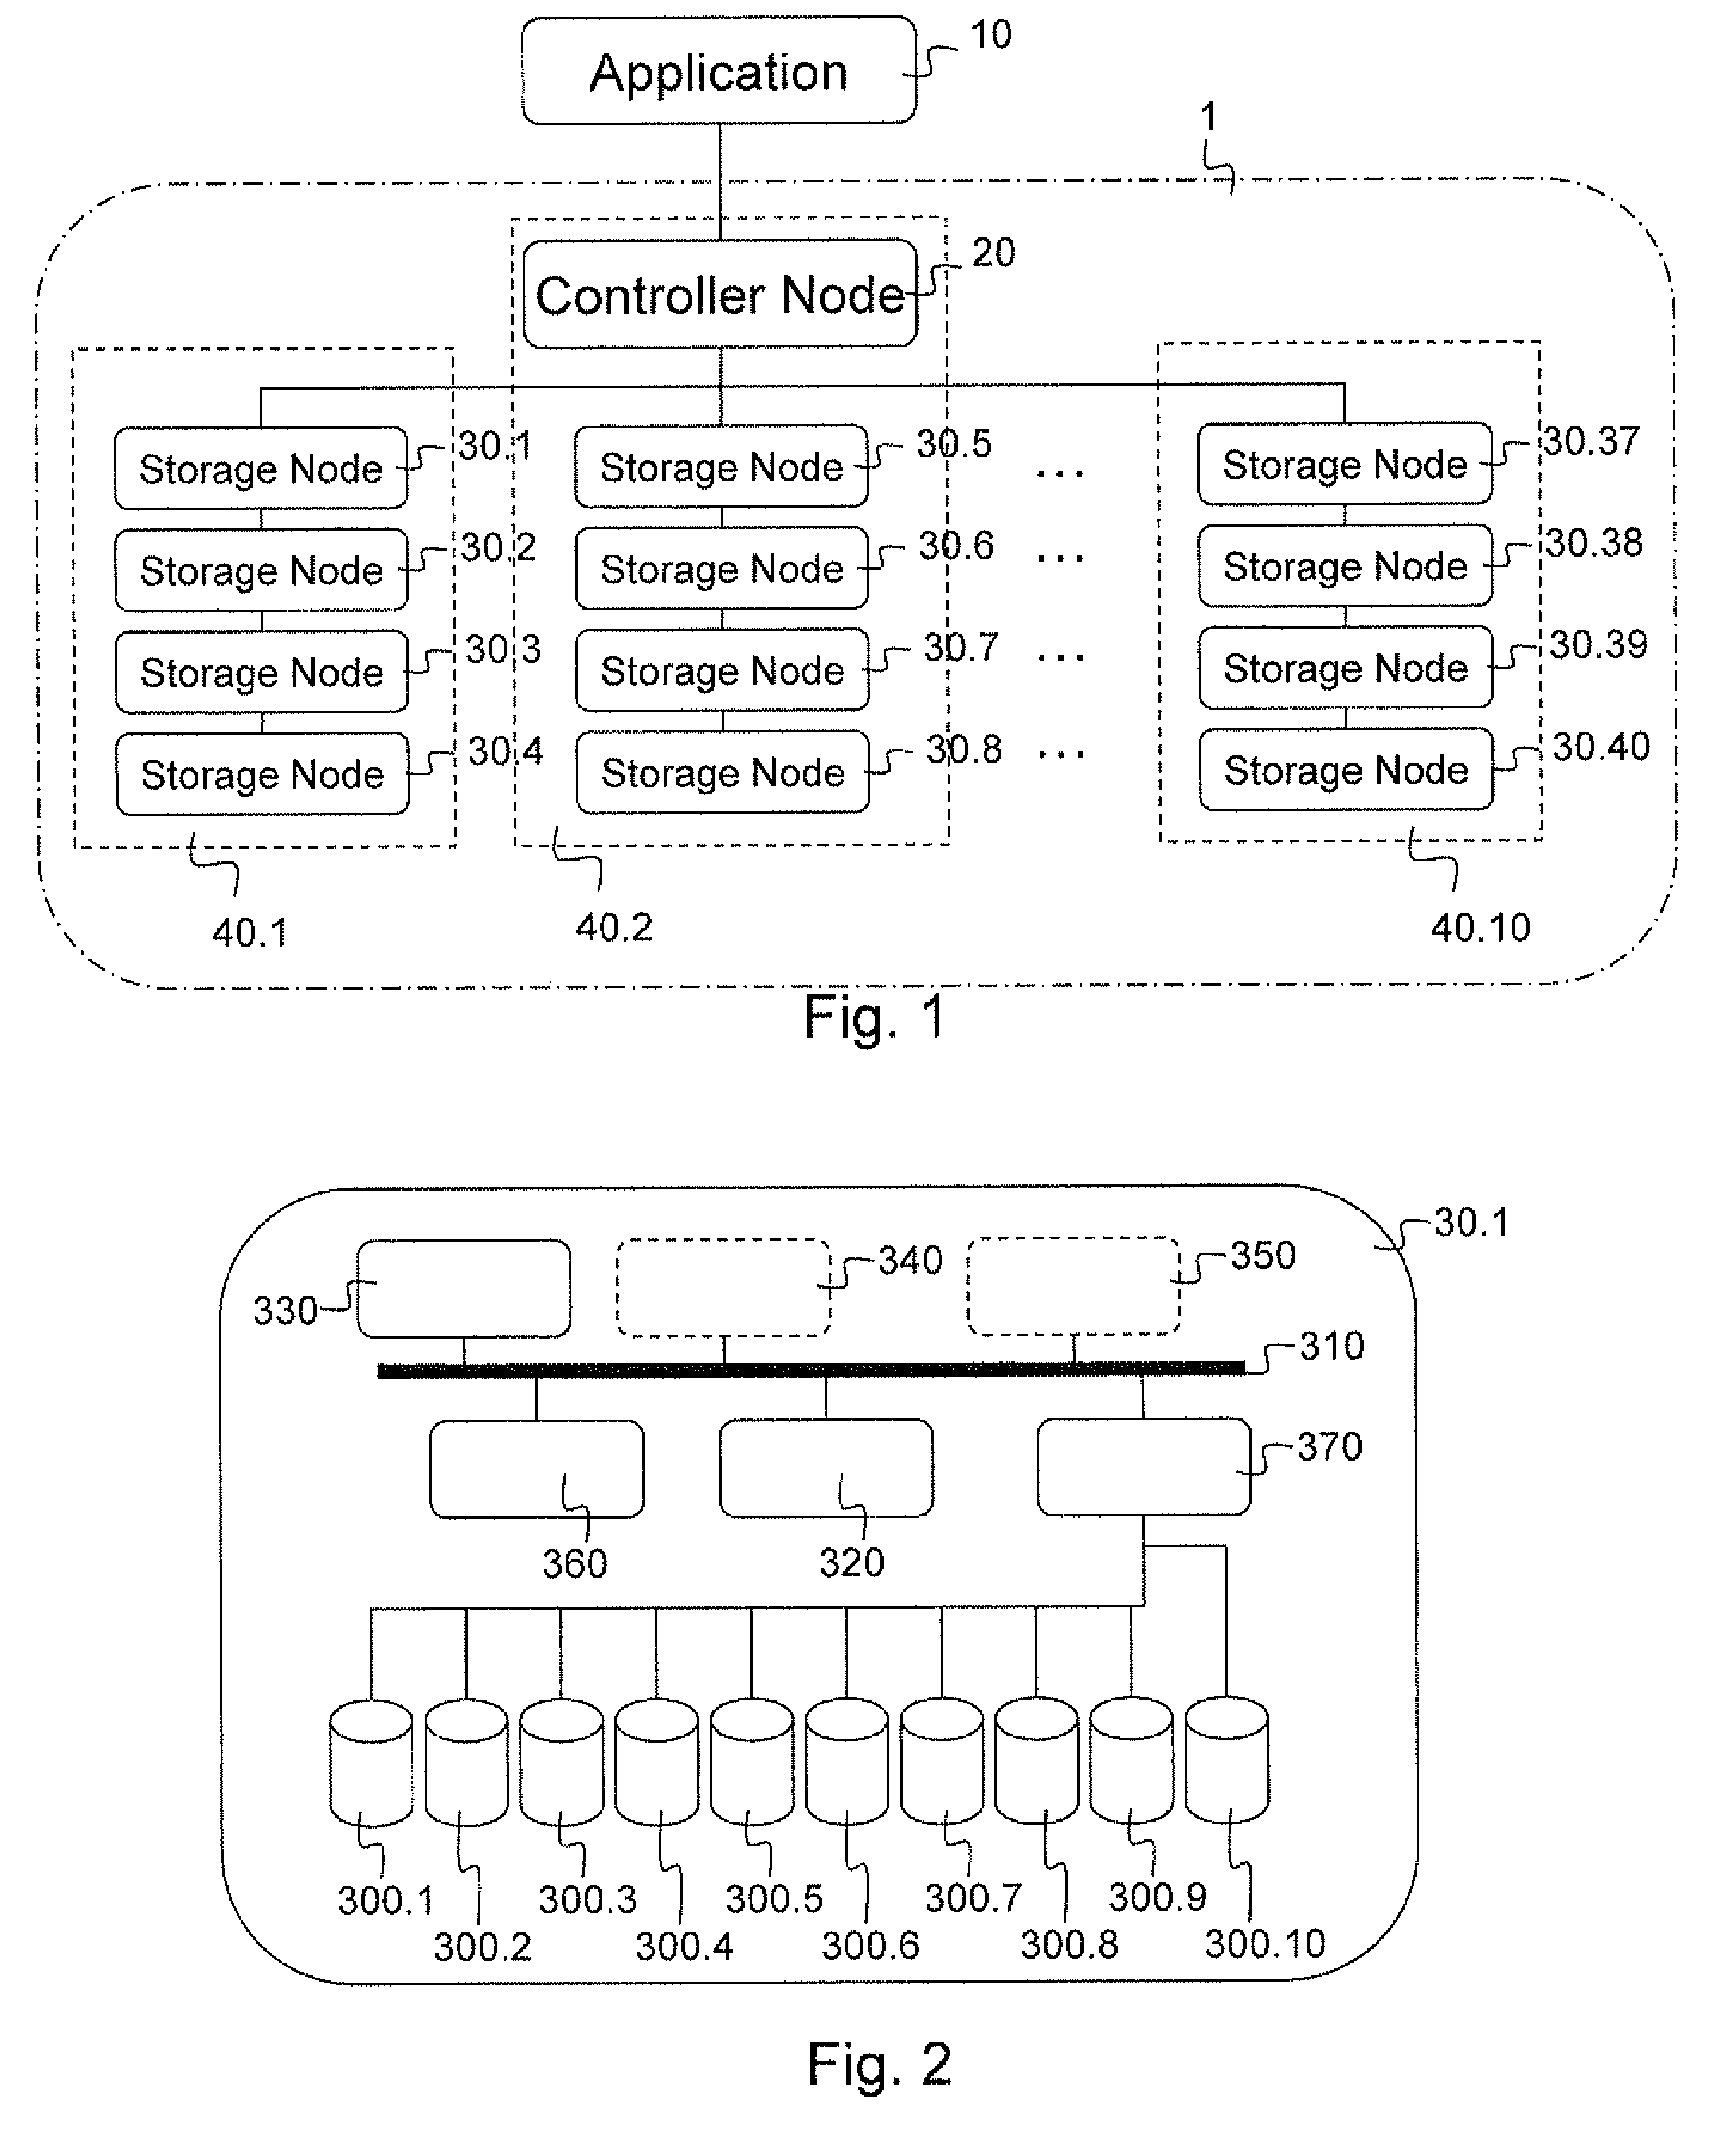 Hierarchical, distributed object storage system